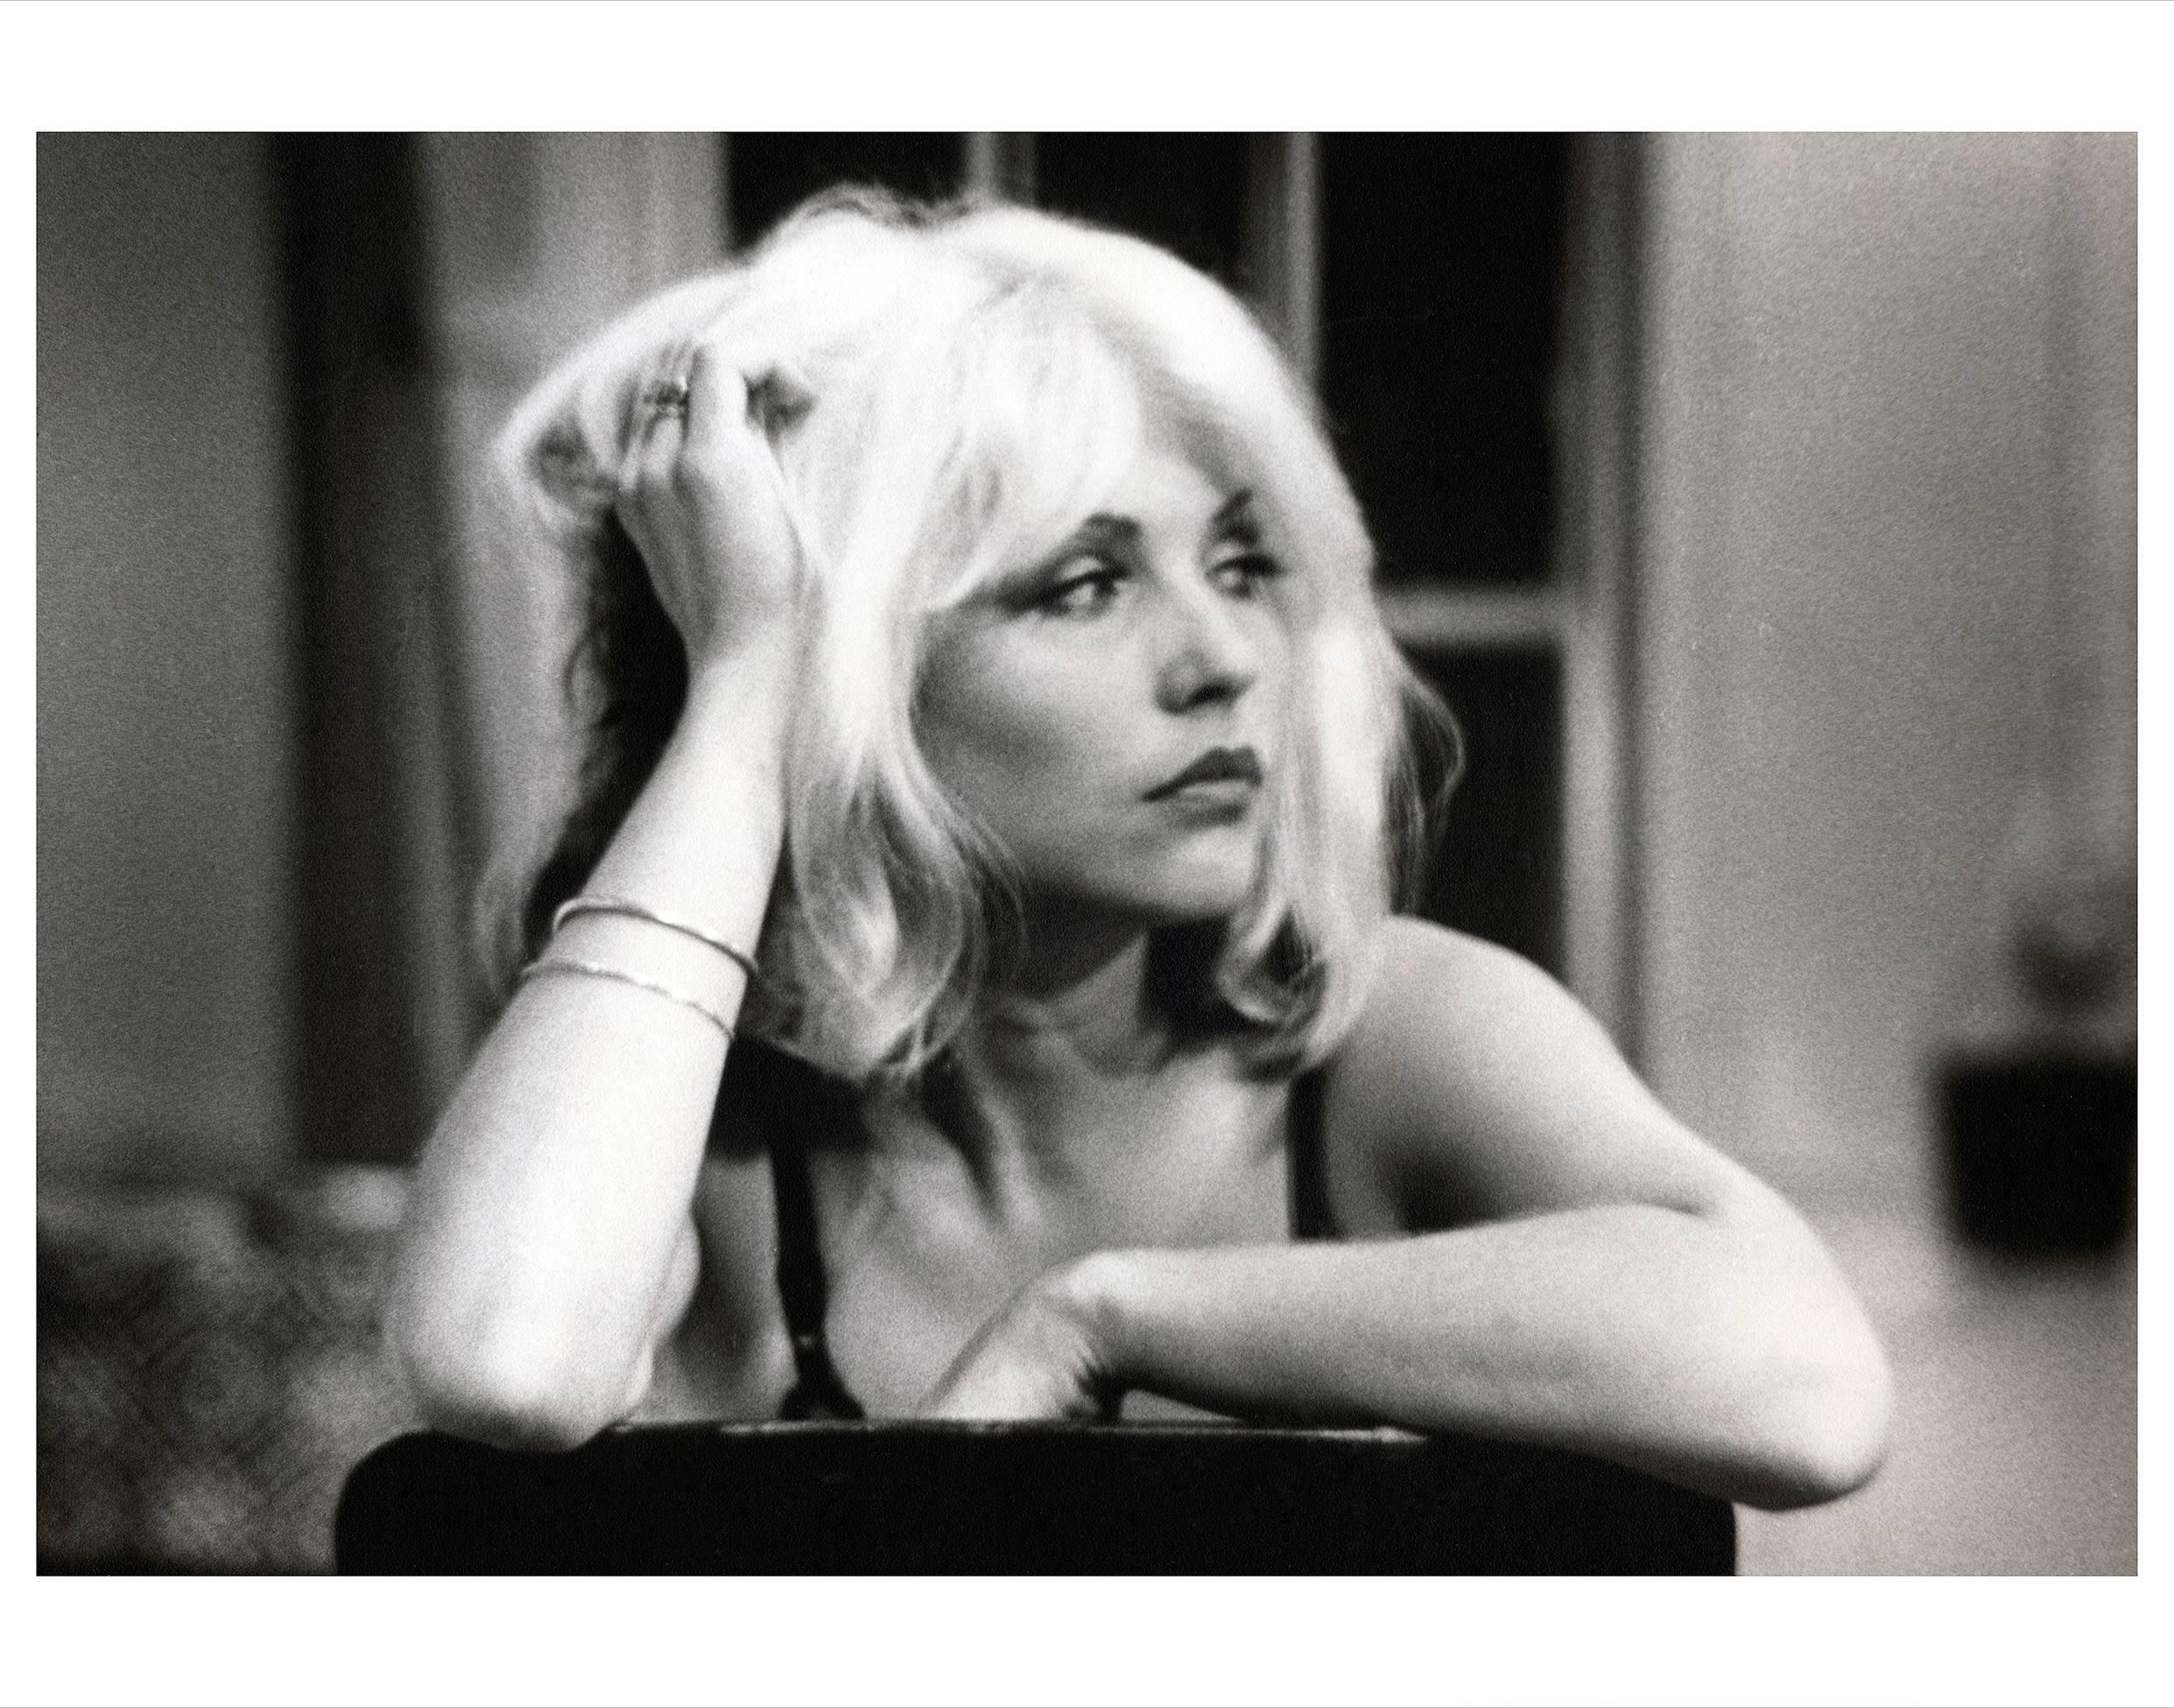 Fernando Natalici Portrait Photograph - Debbie Harry photograph (on the set of Unmade Beds), New York, 1976